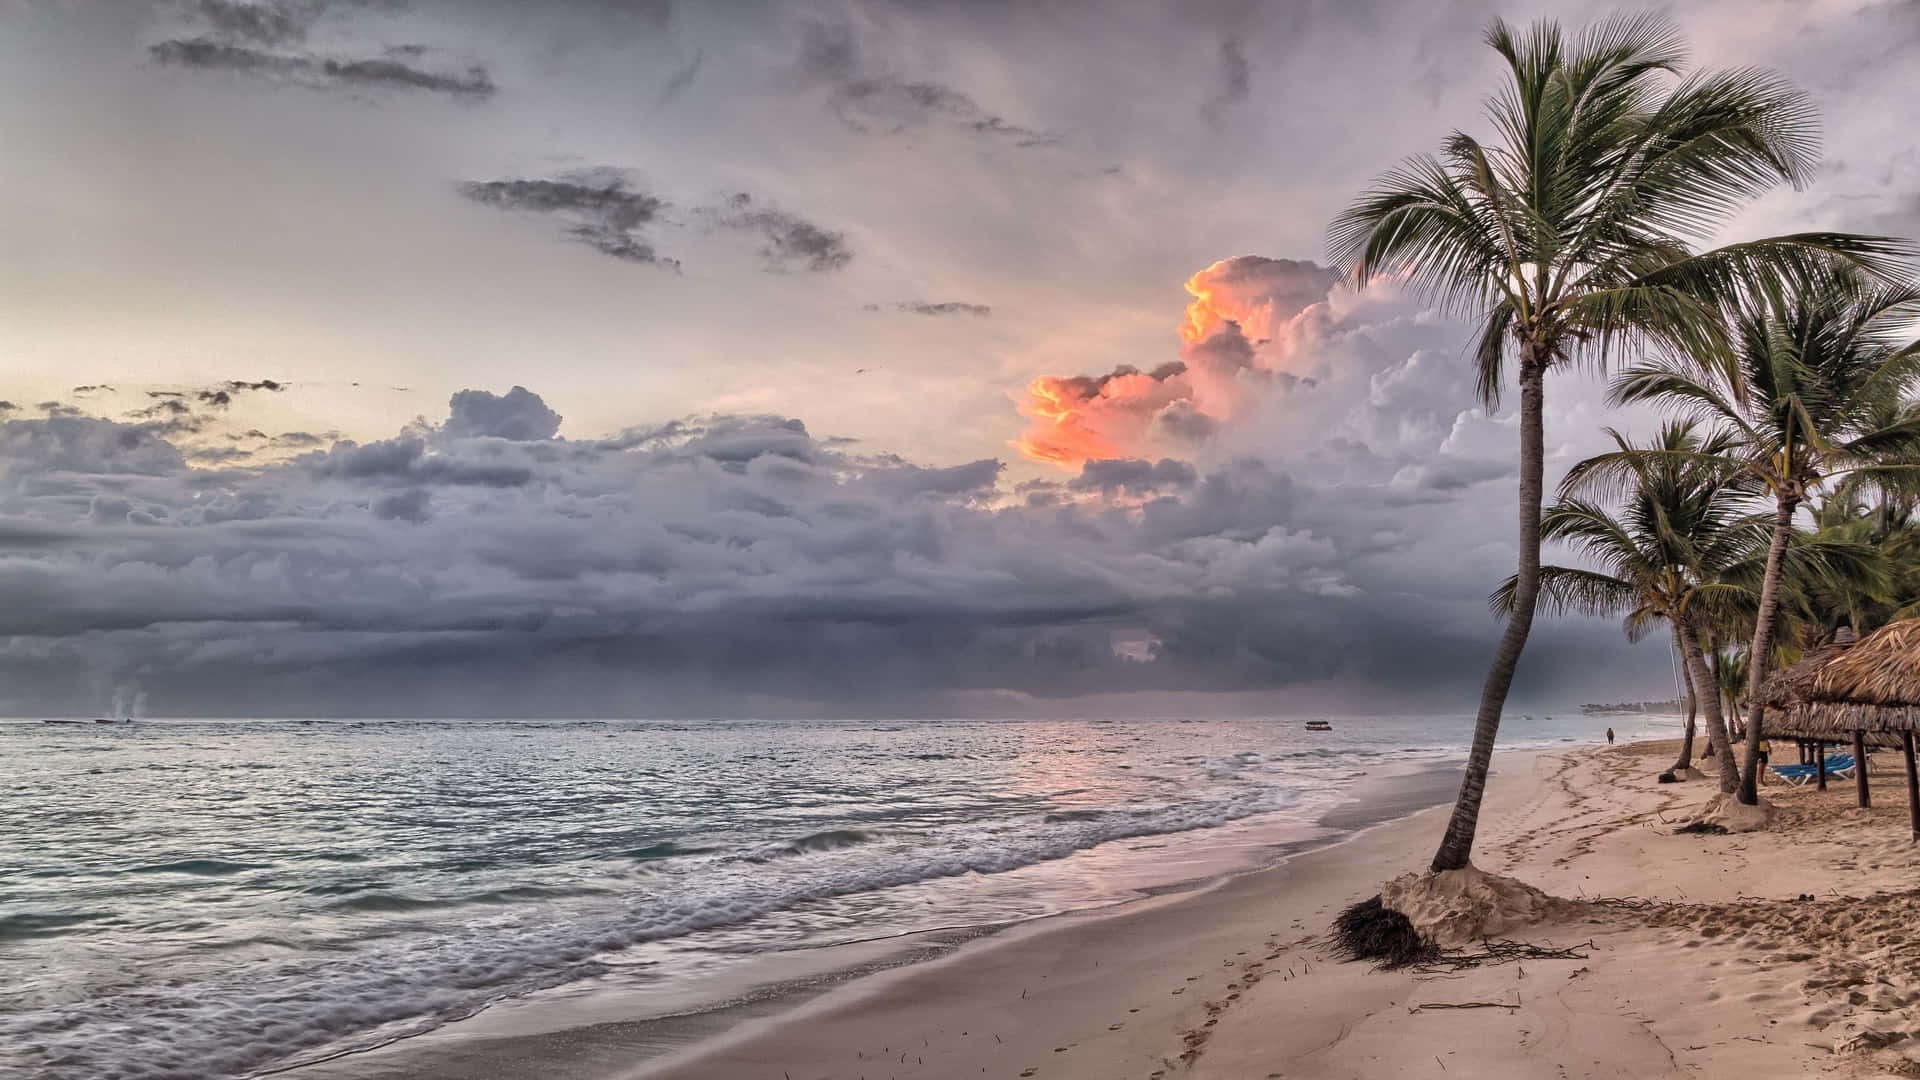 A Beach With Palm Trees And Clouds In The Sky